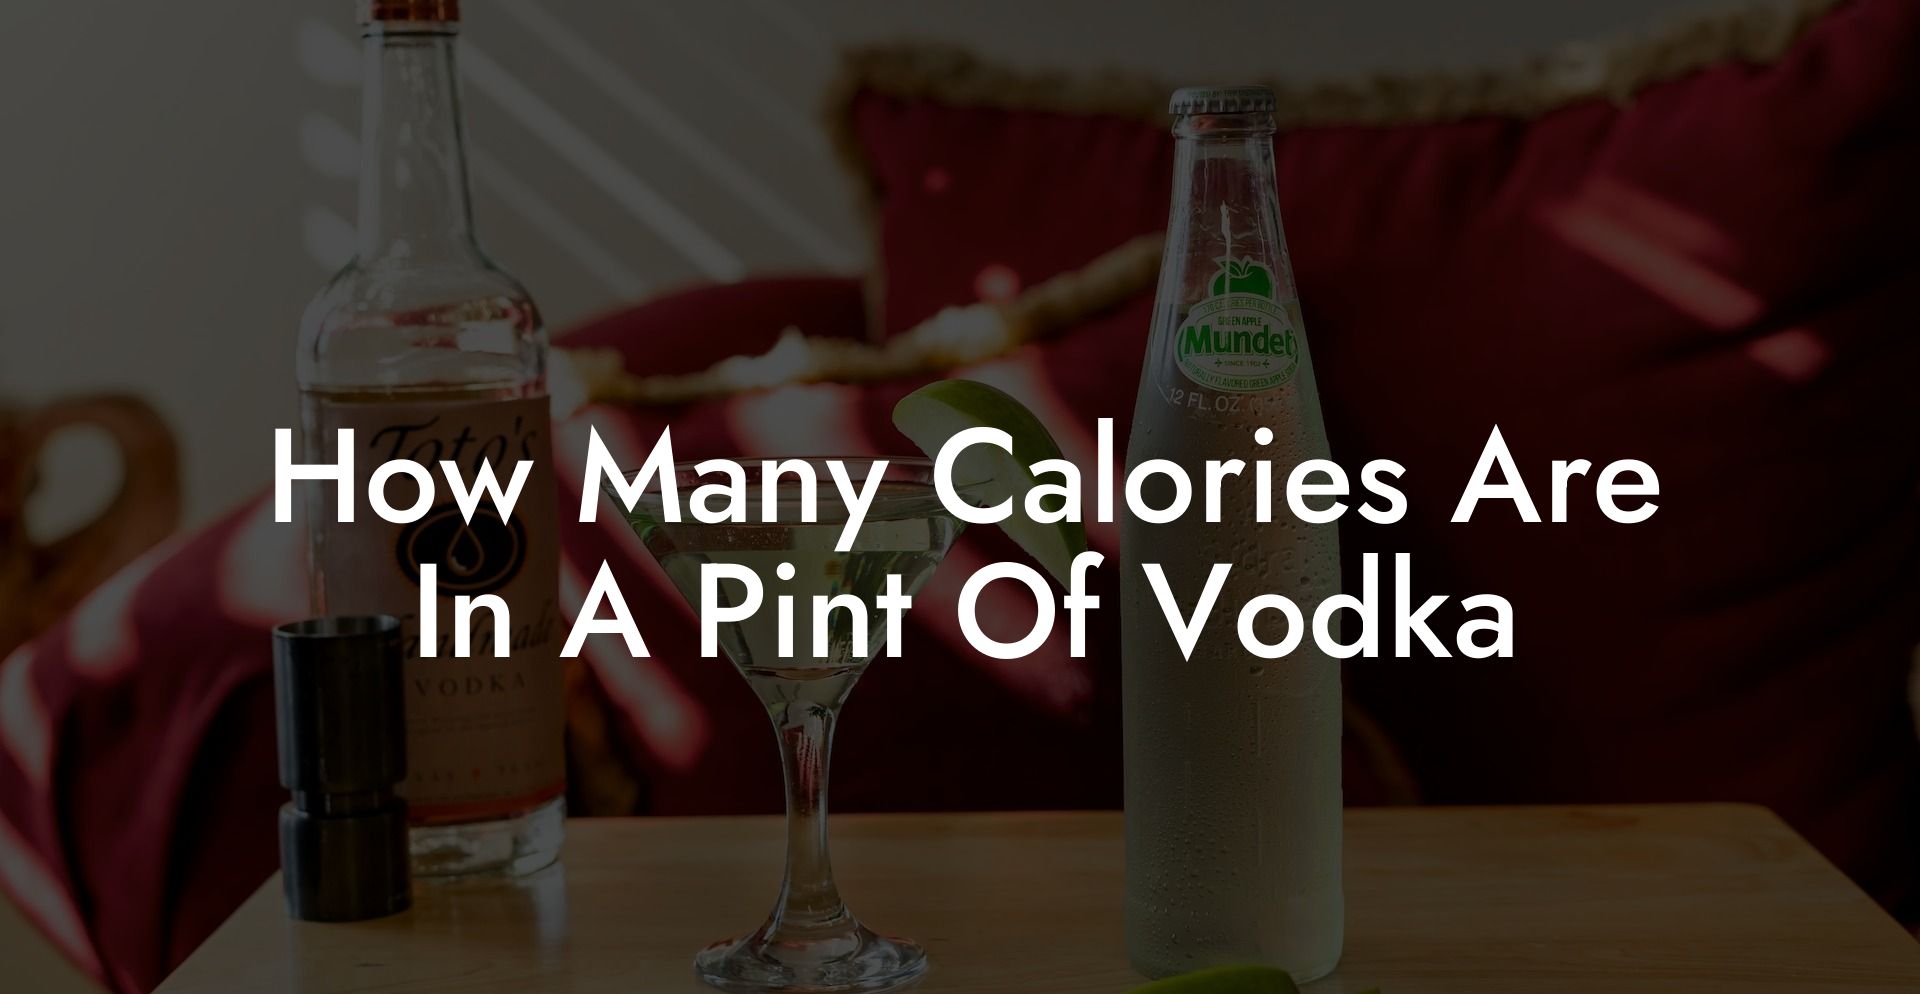 How Many Calories Are In A Pint Of Vodka